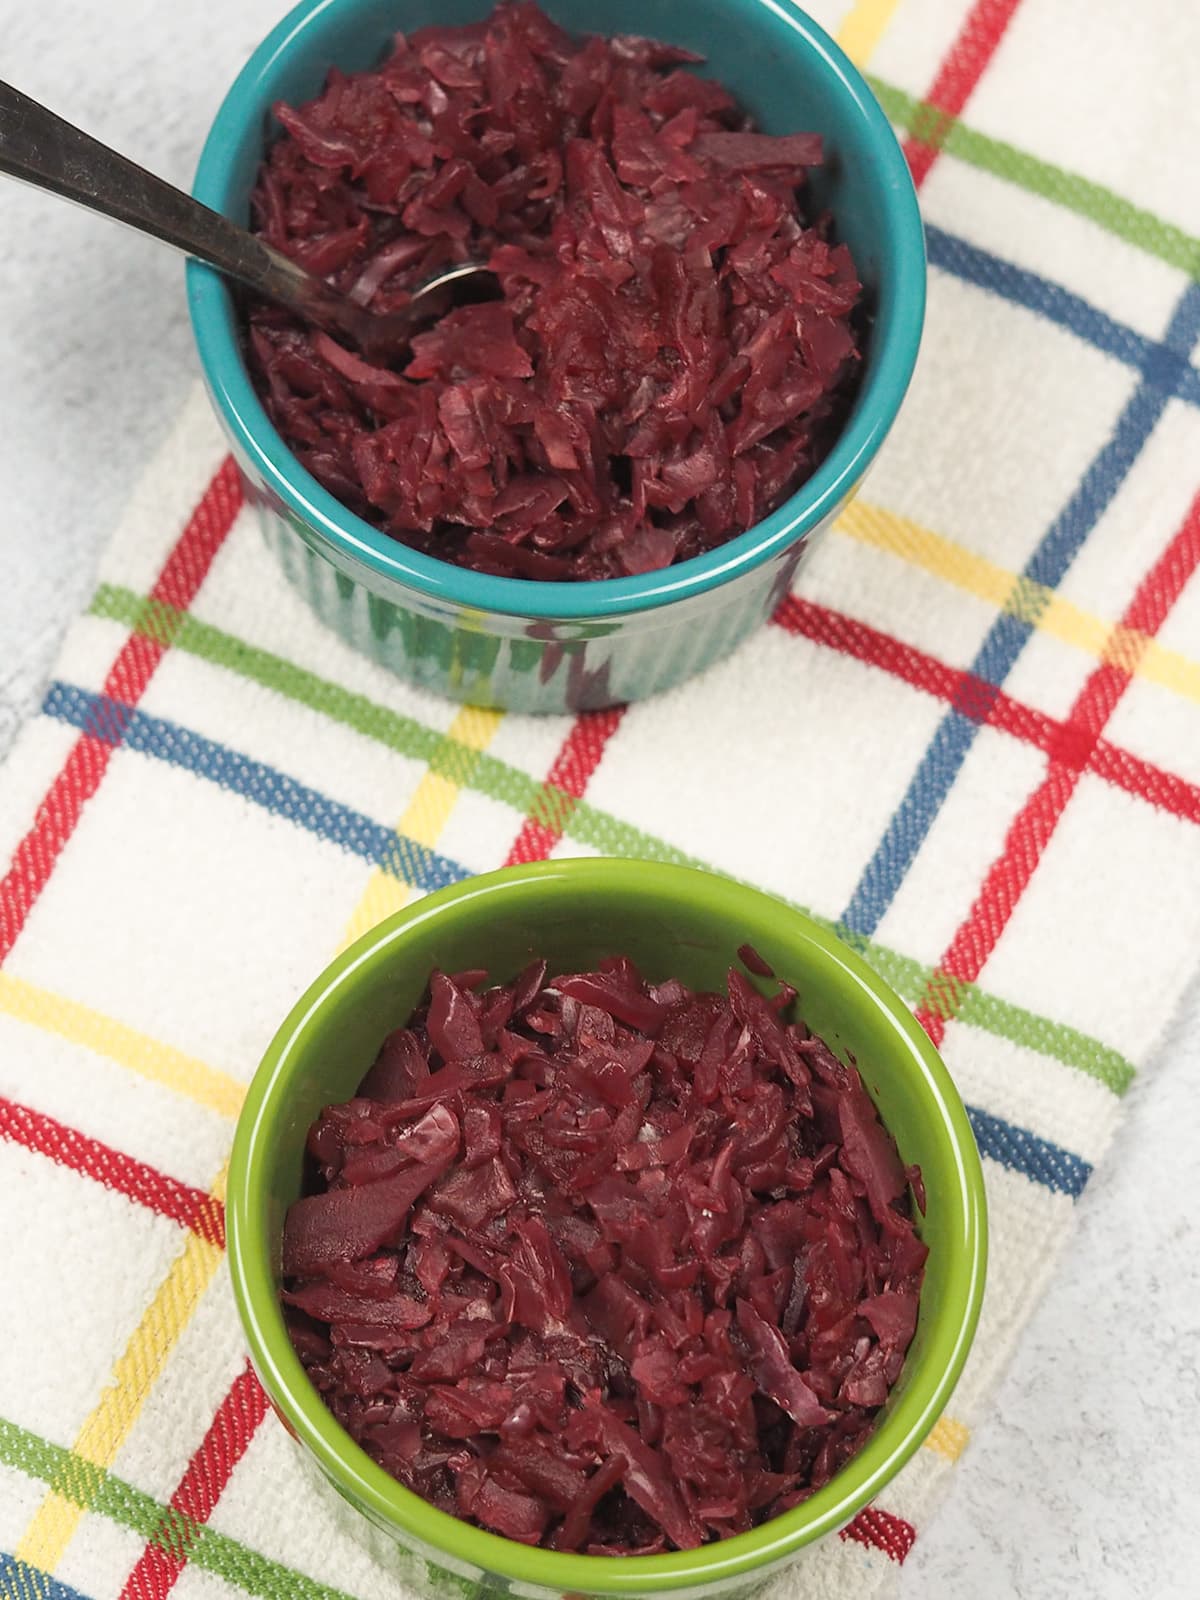 two bowls of red cabbage on towel